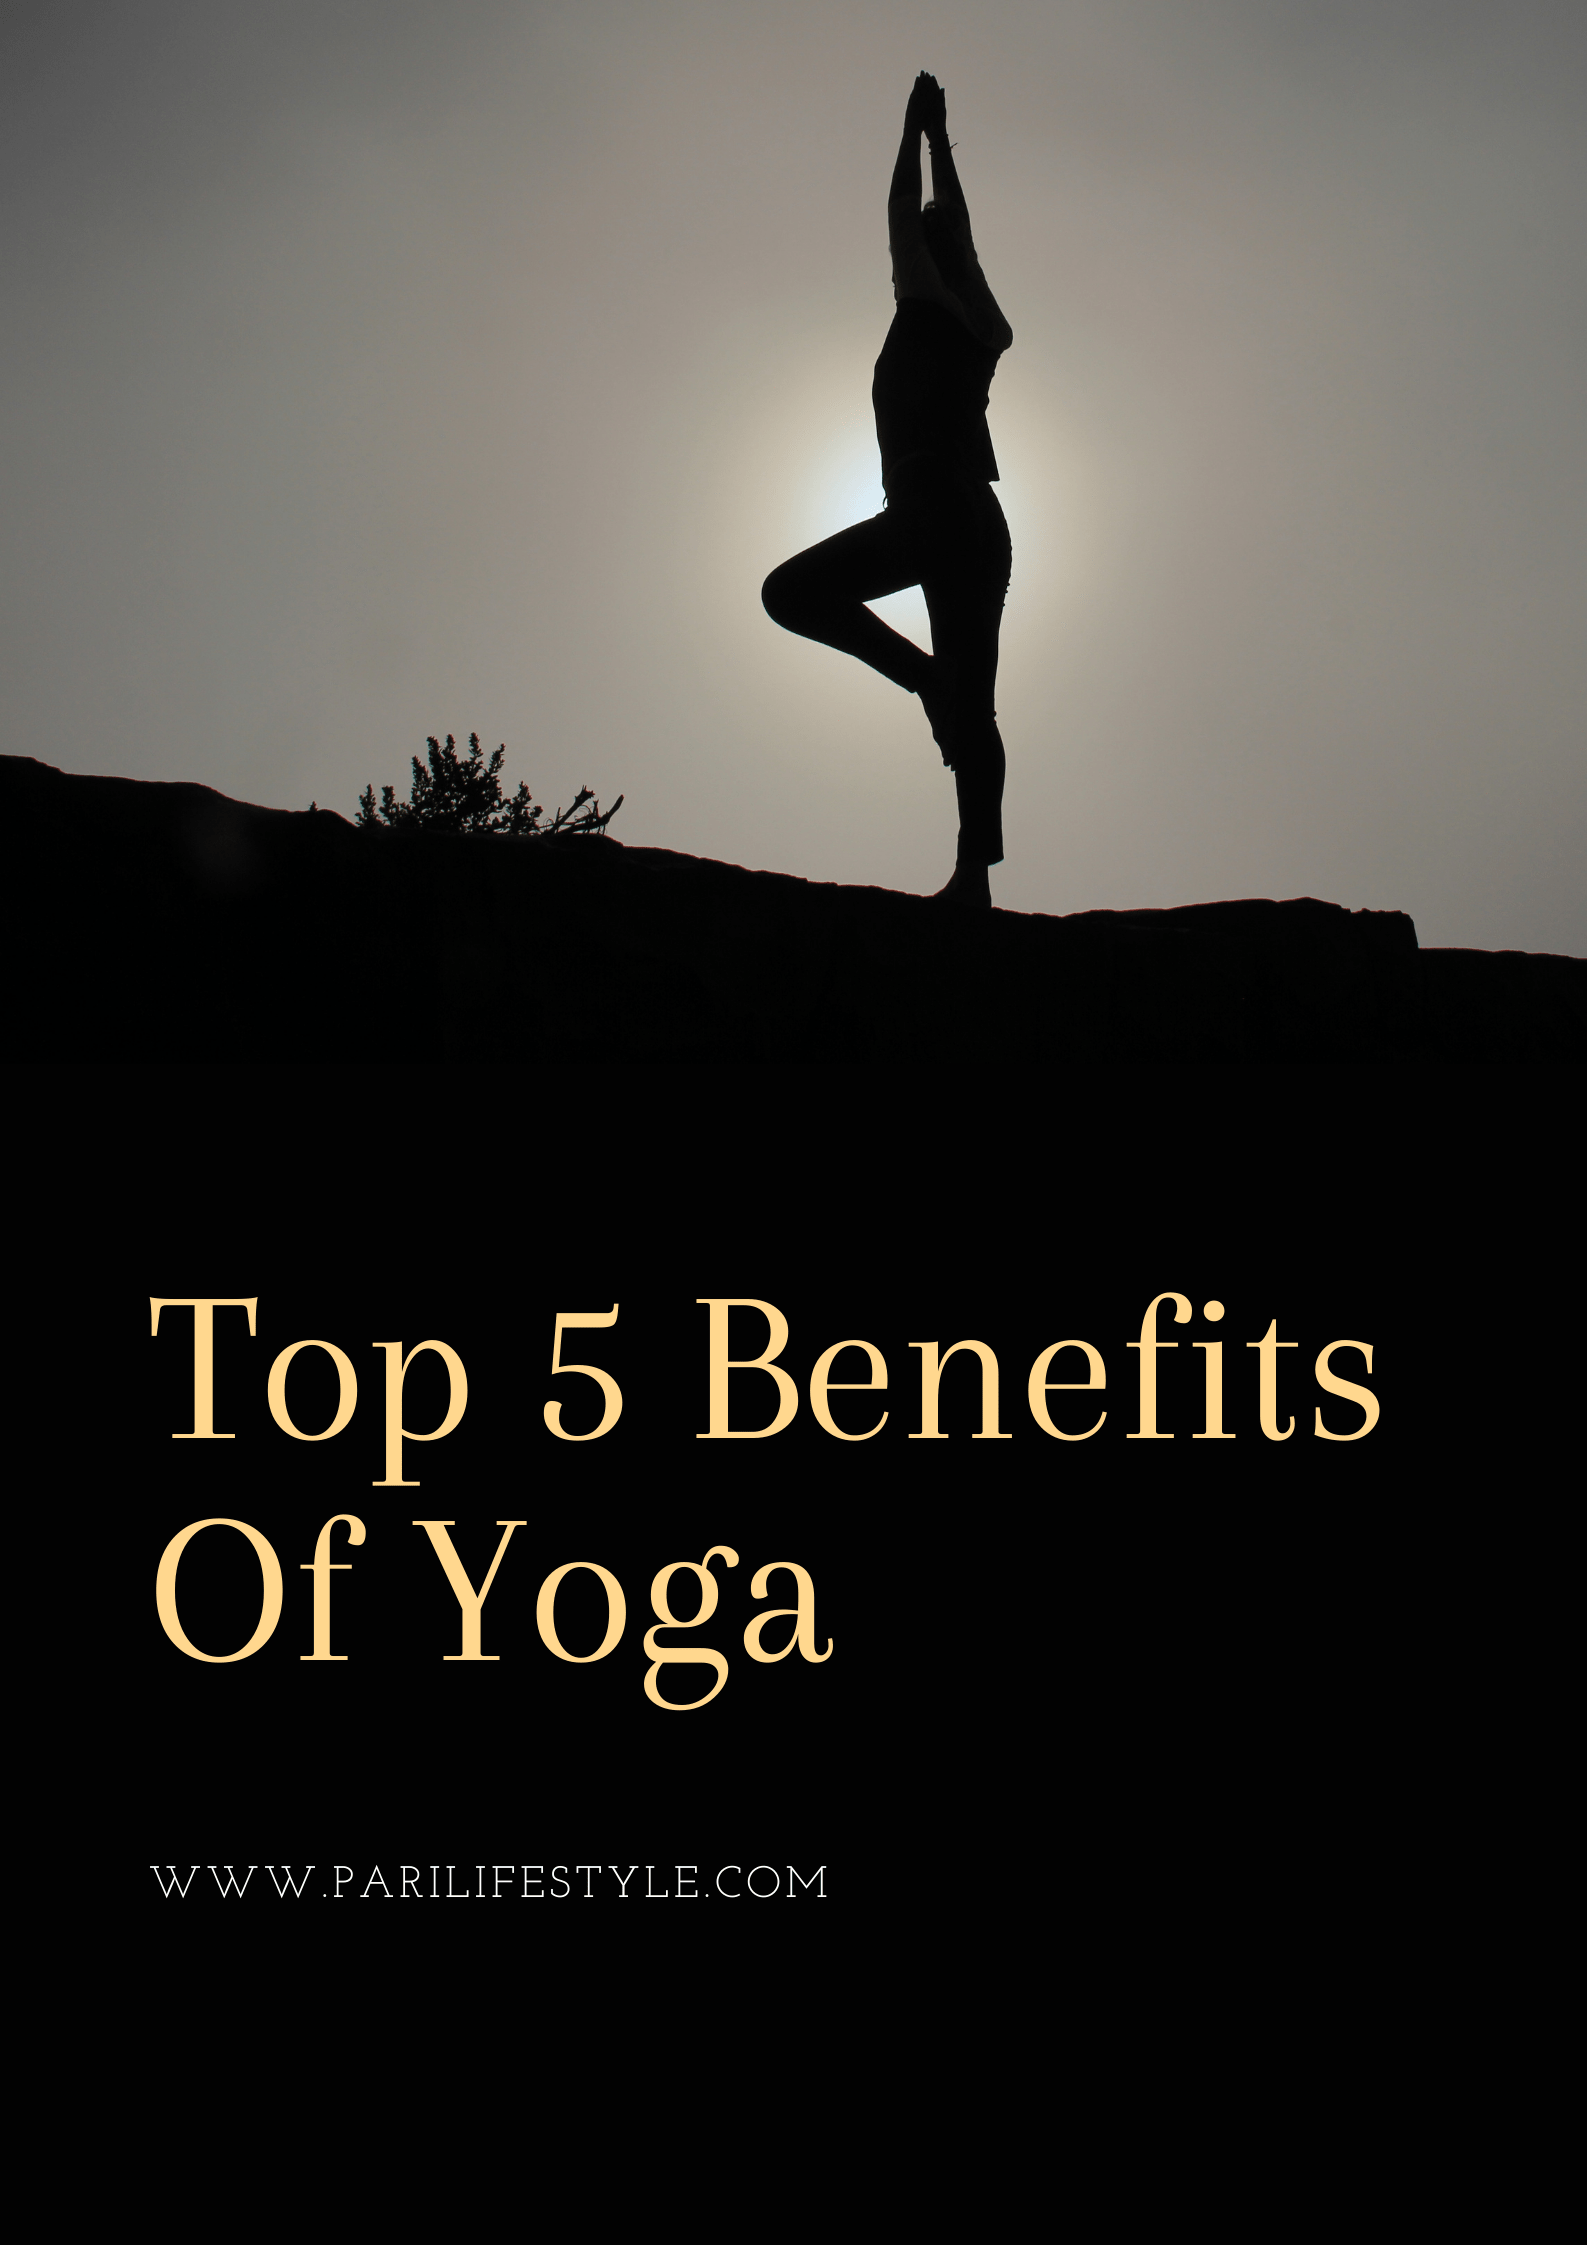 Top 5 Benefits Of Yoga For Everyone